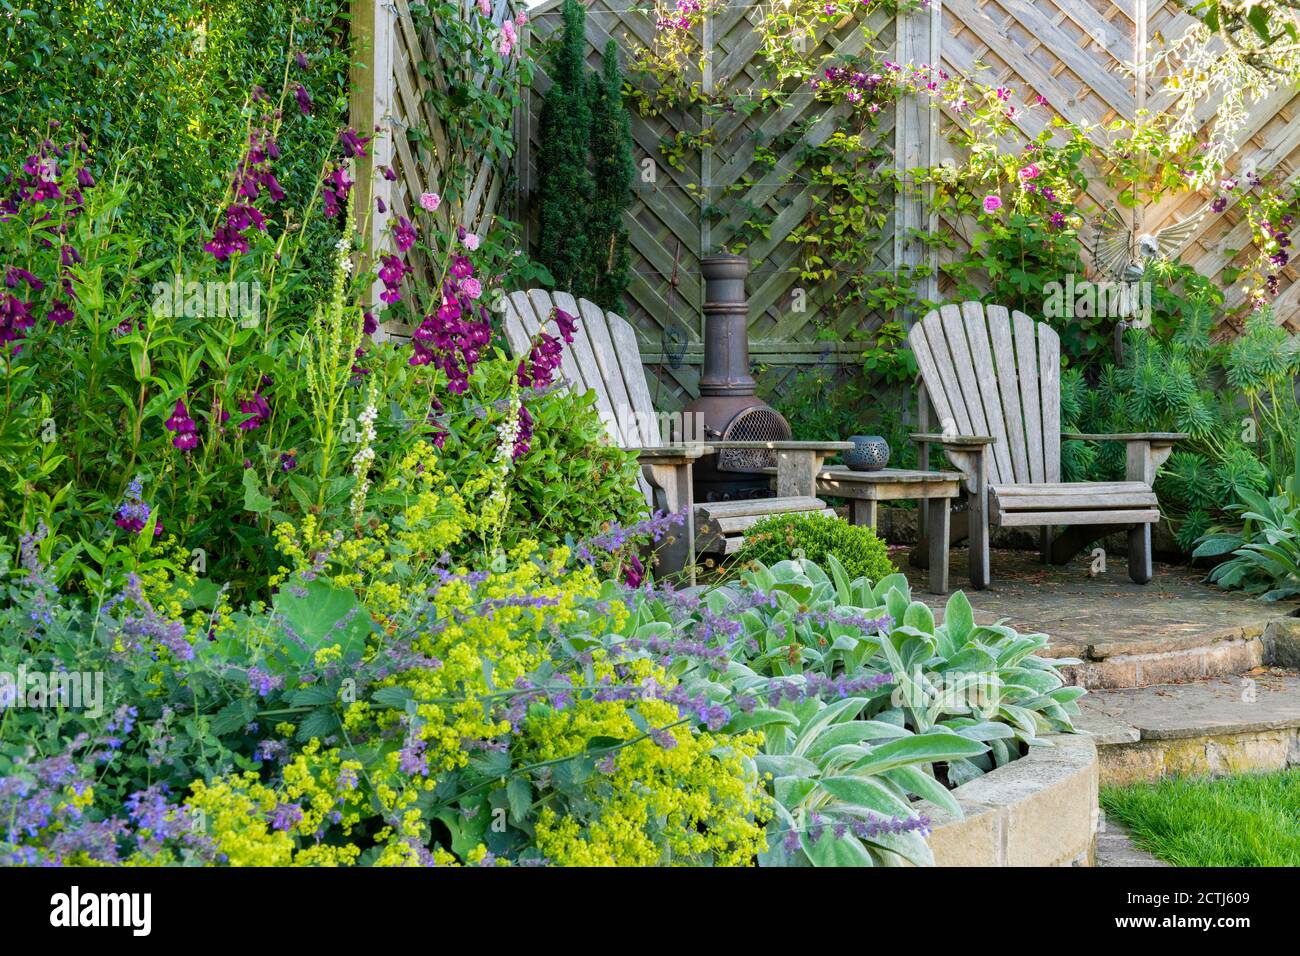 Beautiful landscaped private garden (contemporary design, colourful border plants, patio seating, fence, ornamental chiminea) - Yorkshire, England, UK Stock Photo